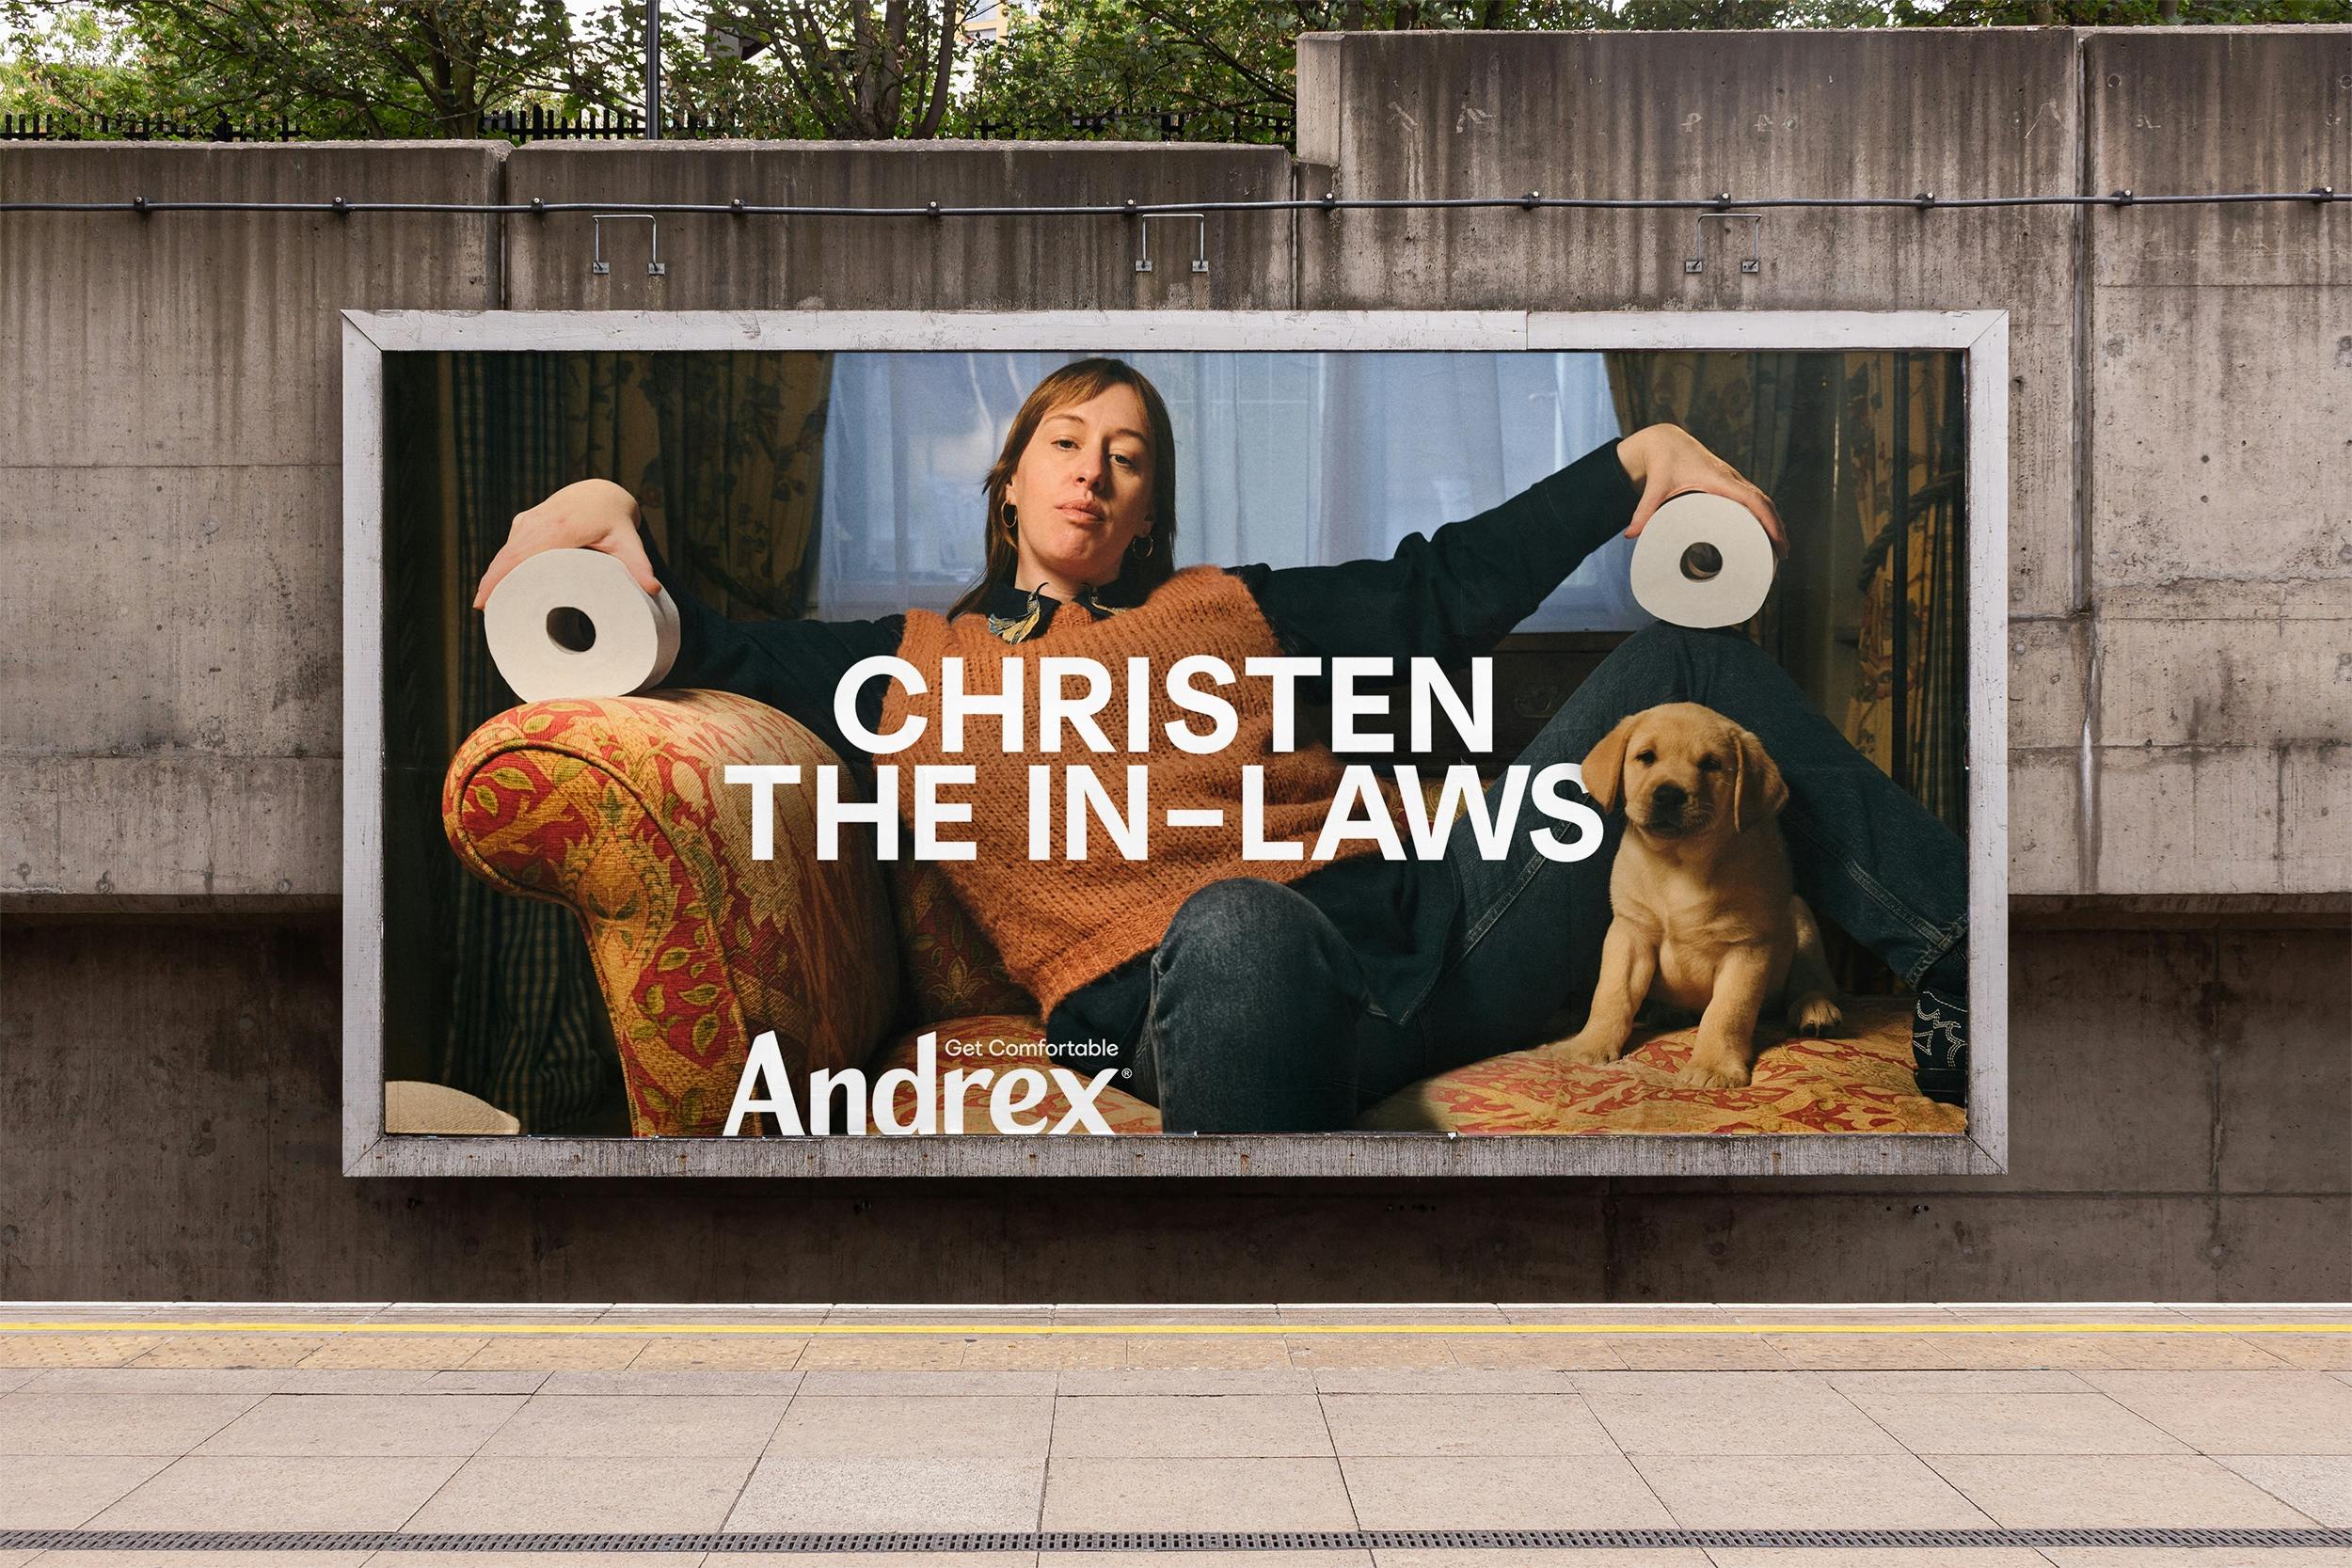 A billboard advertisement featuring a woman and a dog promoting Andrex toilet paper with the caption "Christen The In-Laws"